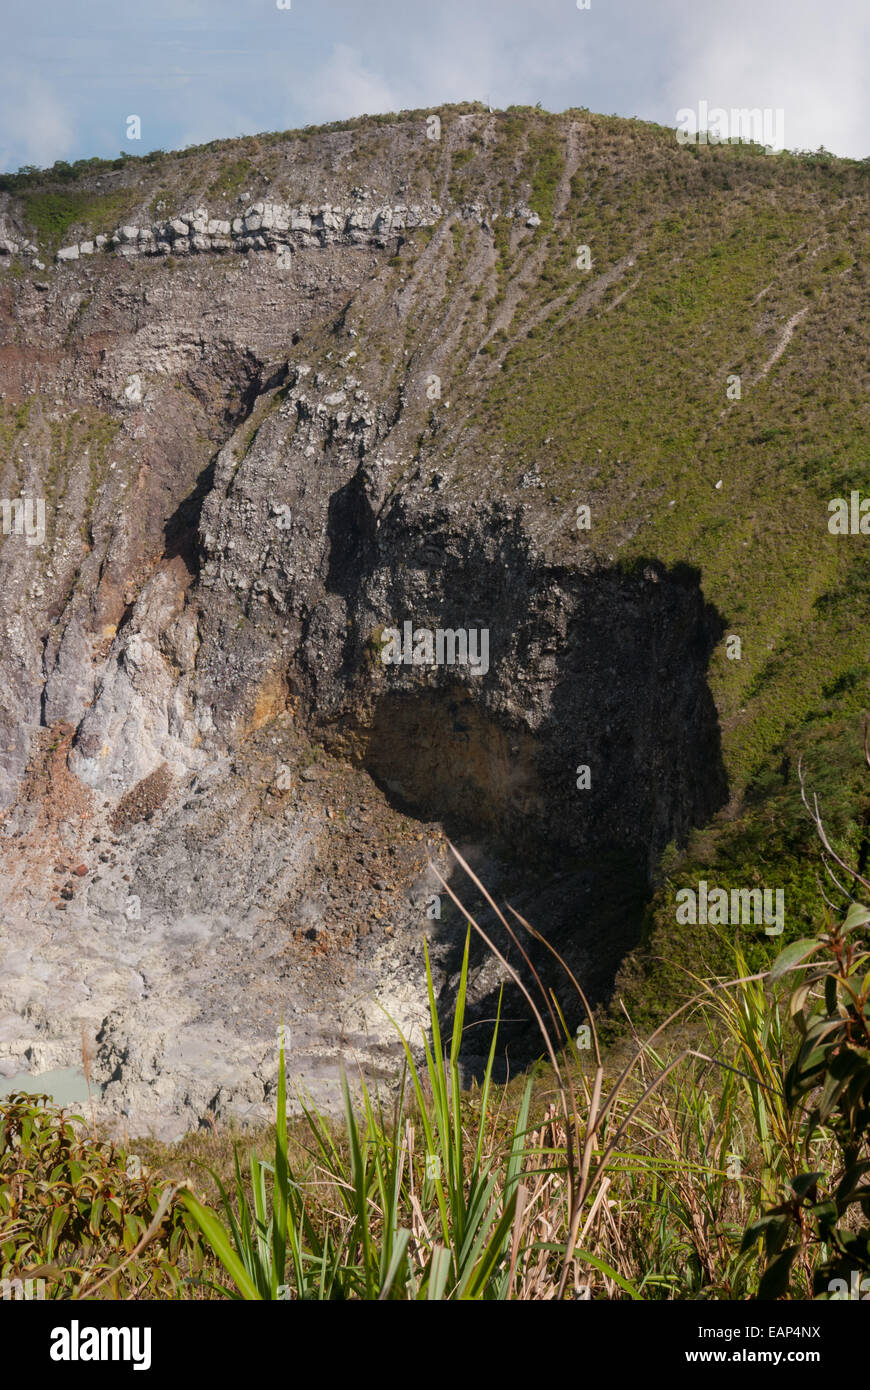 The crater of Mount Mahawu volcano in Tomohon, North Sulawesi, Indonesia. Stock Photo